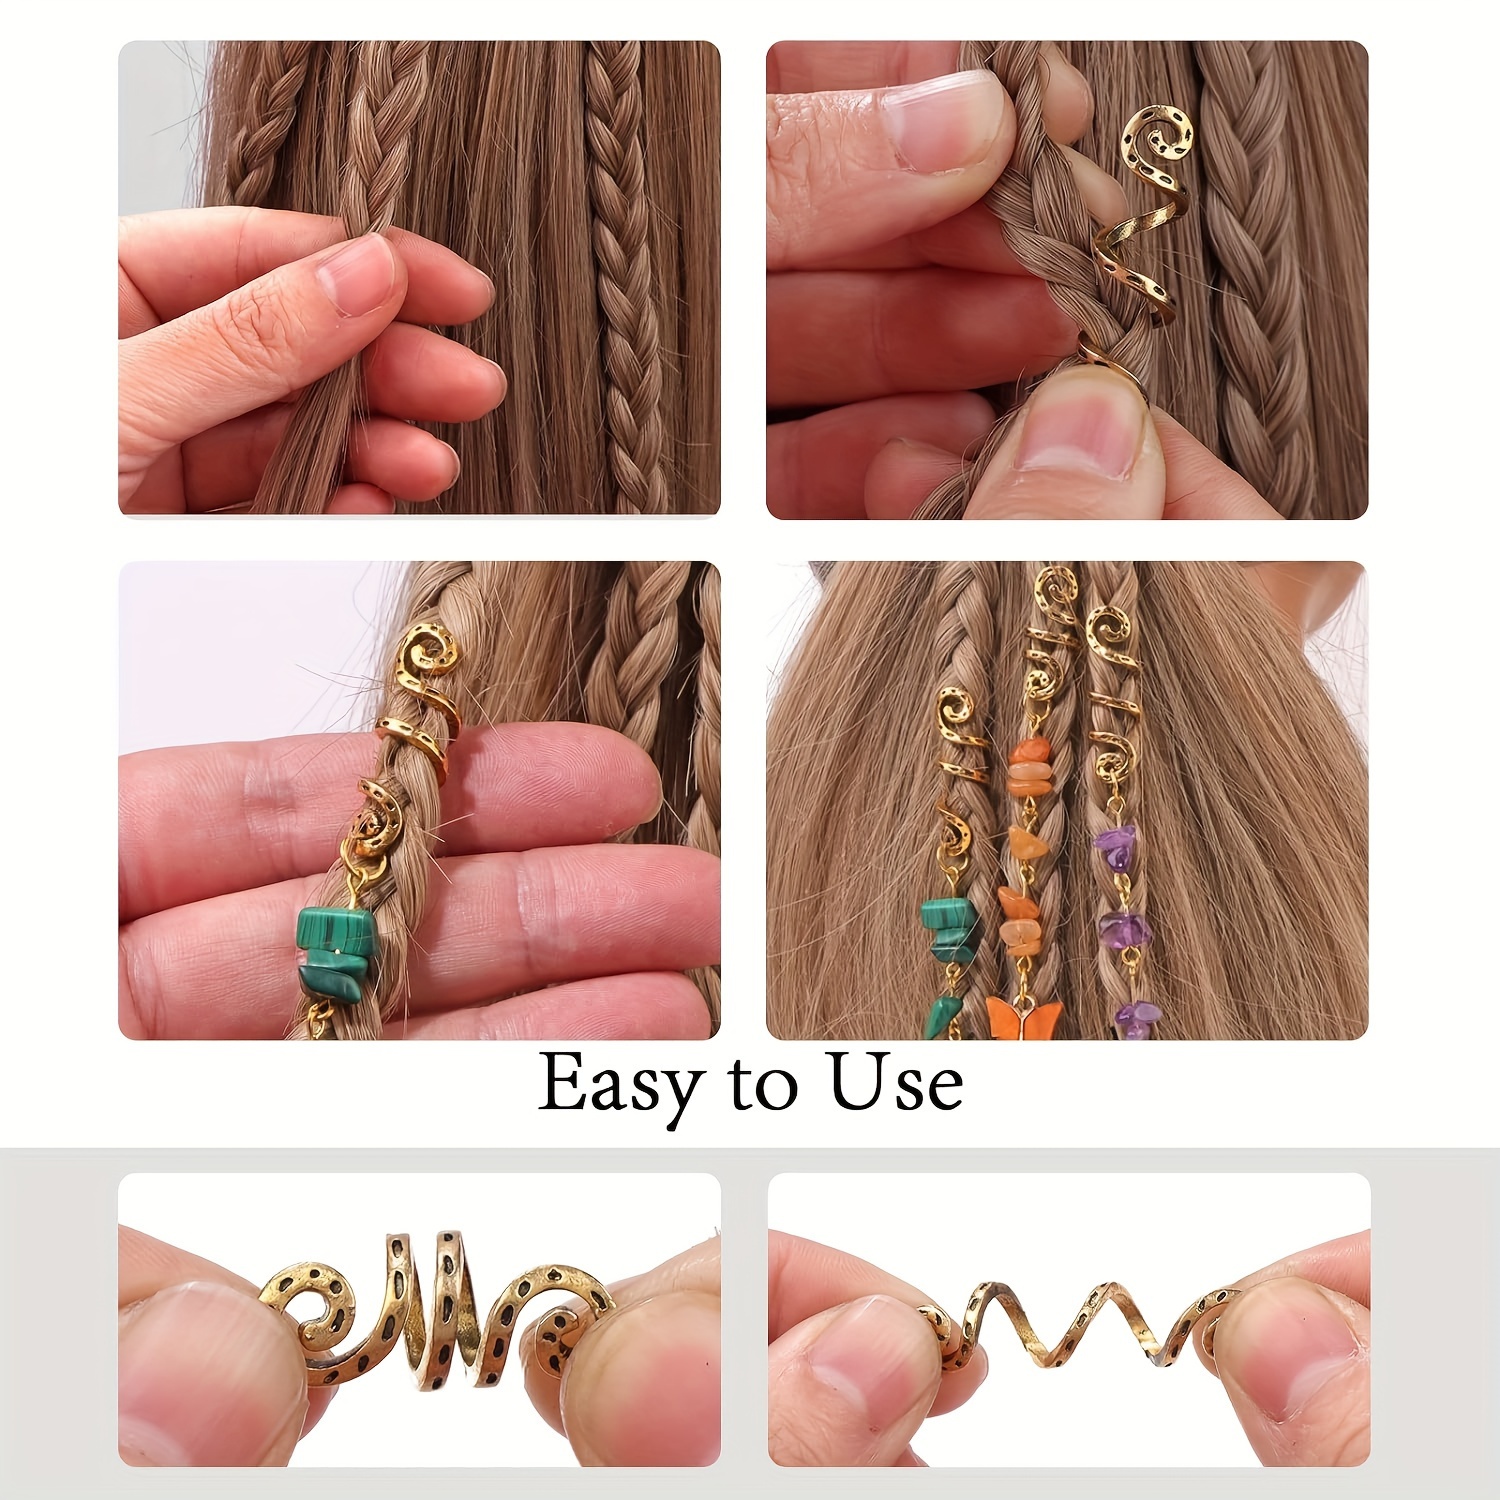 NOGIS 6 Pack Handmade Hair Jewelry for Braids,Colored Natural Stone crystal  Tassel Dreadlock Accessories Hair Gems for Women 